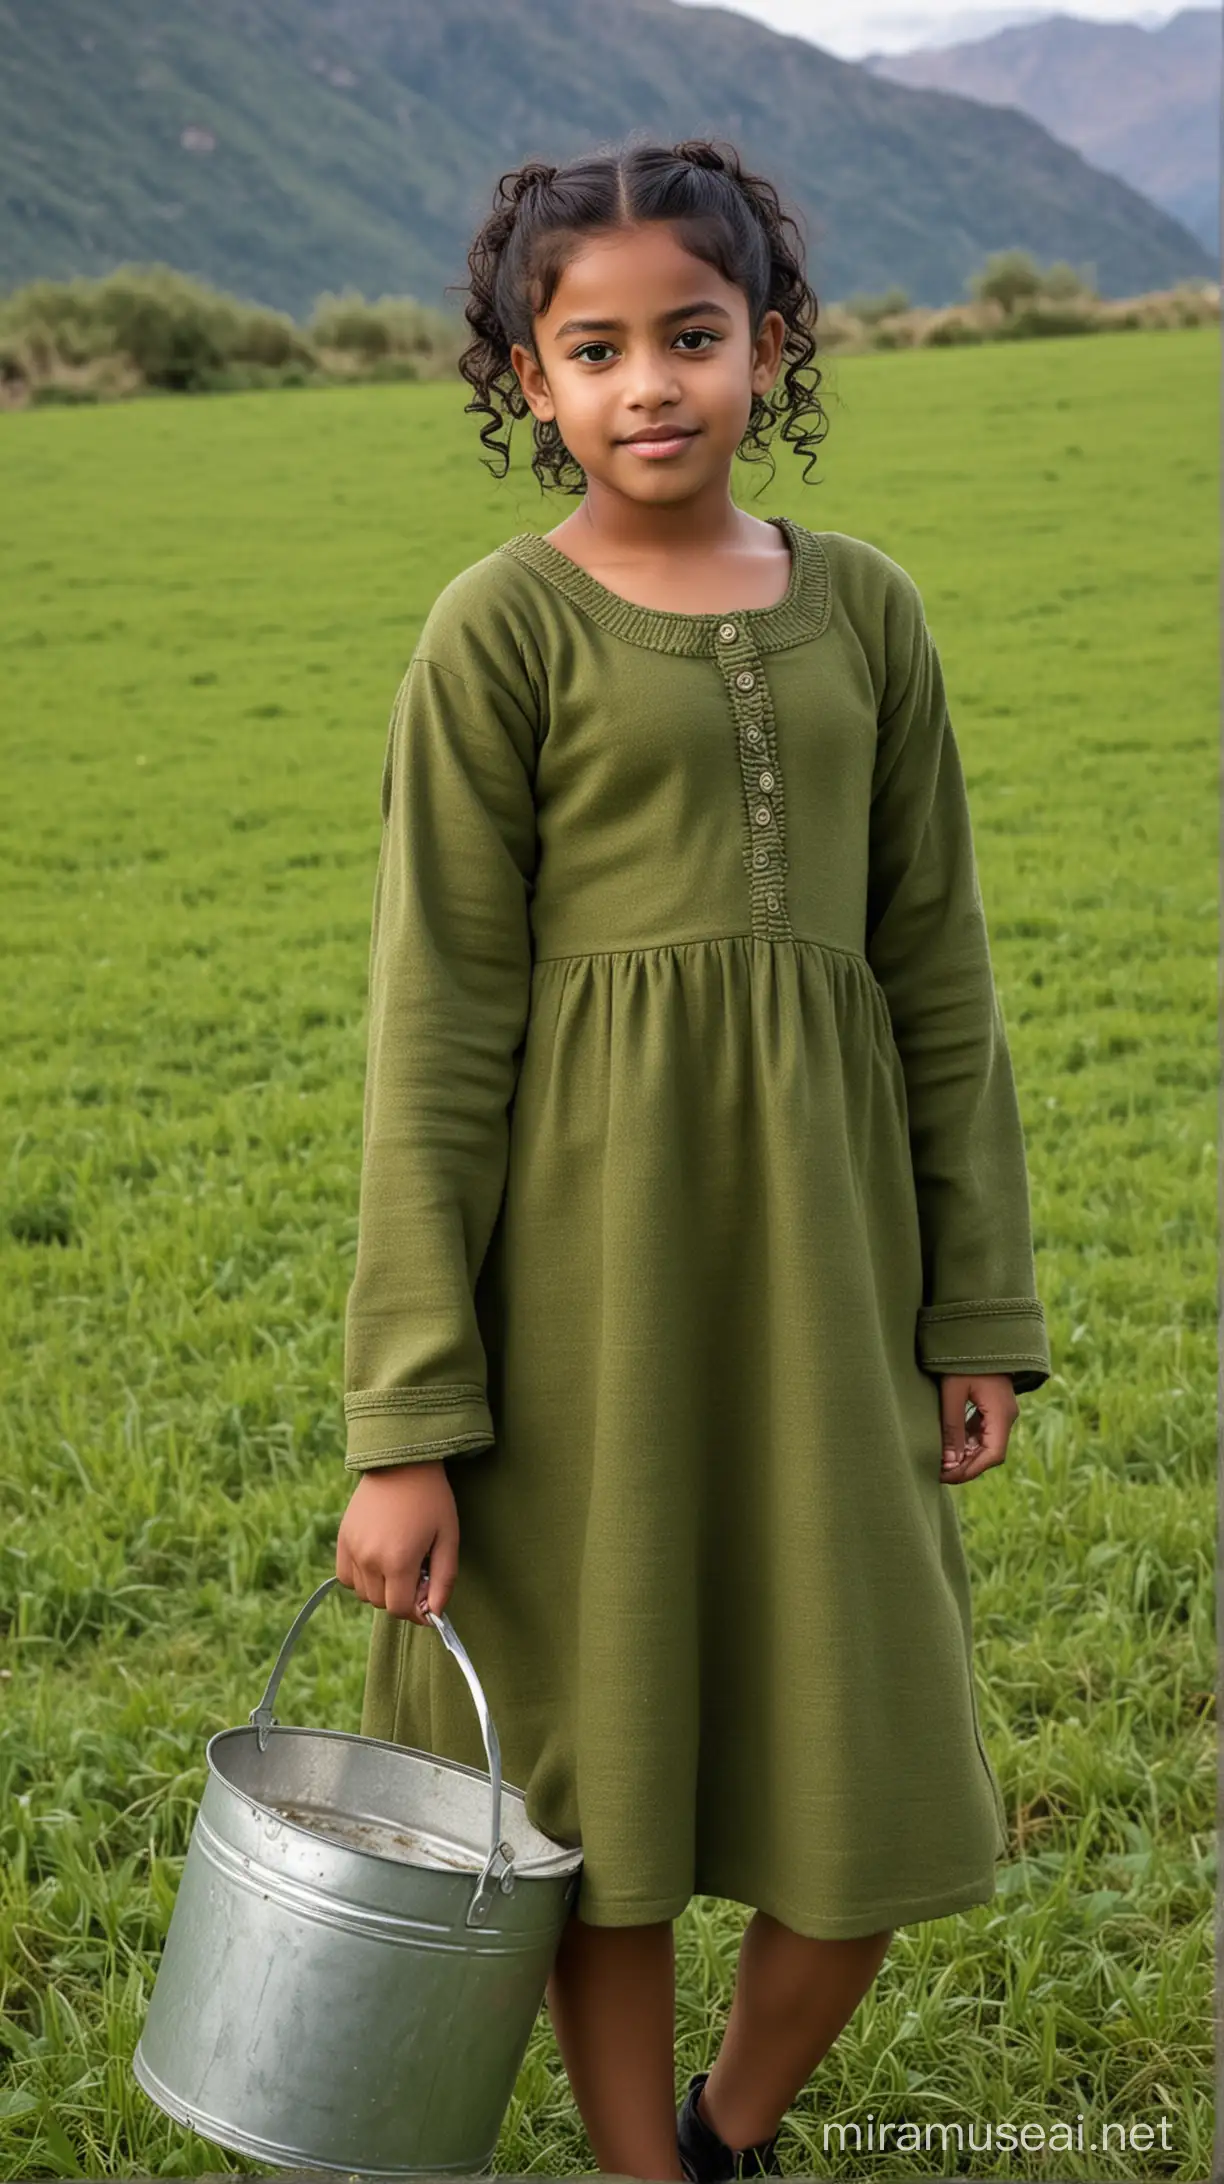 A 12 year old fat black girl with small eyes, wide lips, weak chin, small nose and long curly black hair with a bun at back wearing a long sleeved woolen kurti holding a steel bucket and standing on a green field in a mountain 